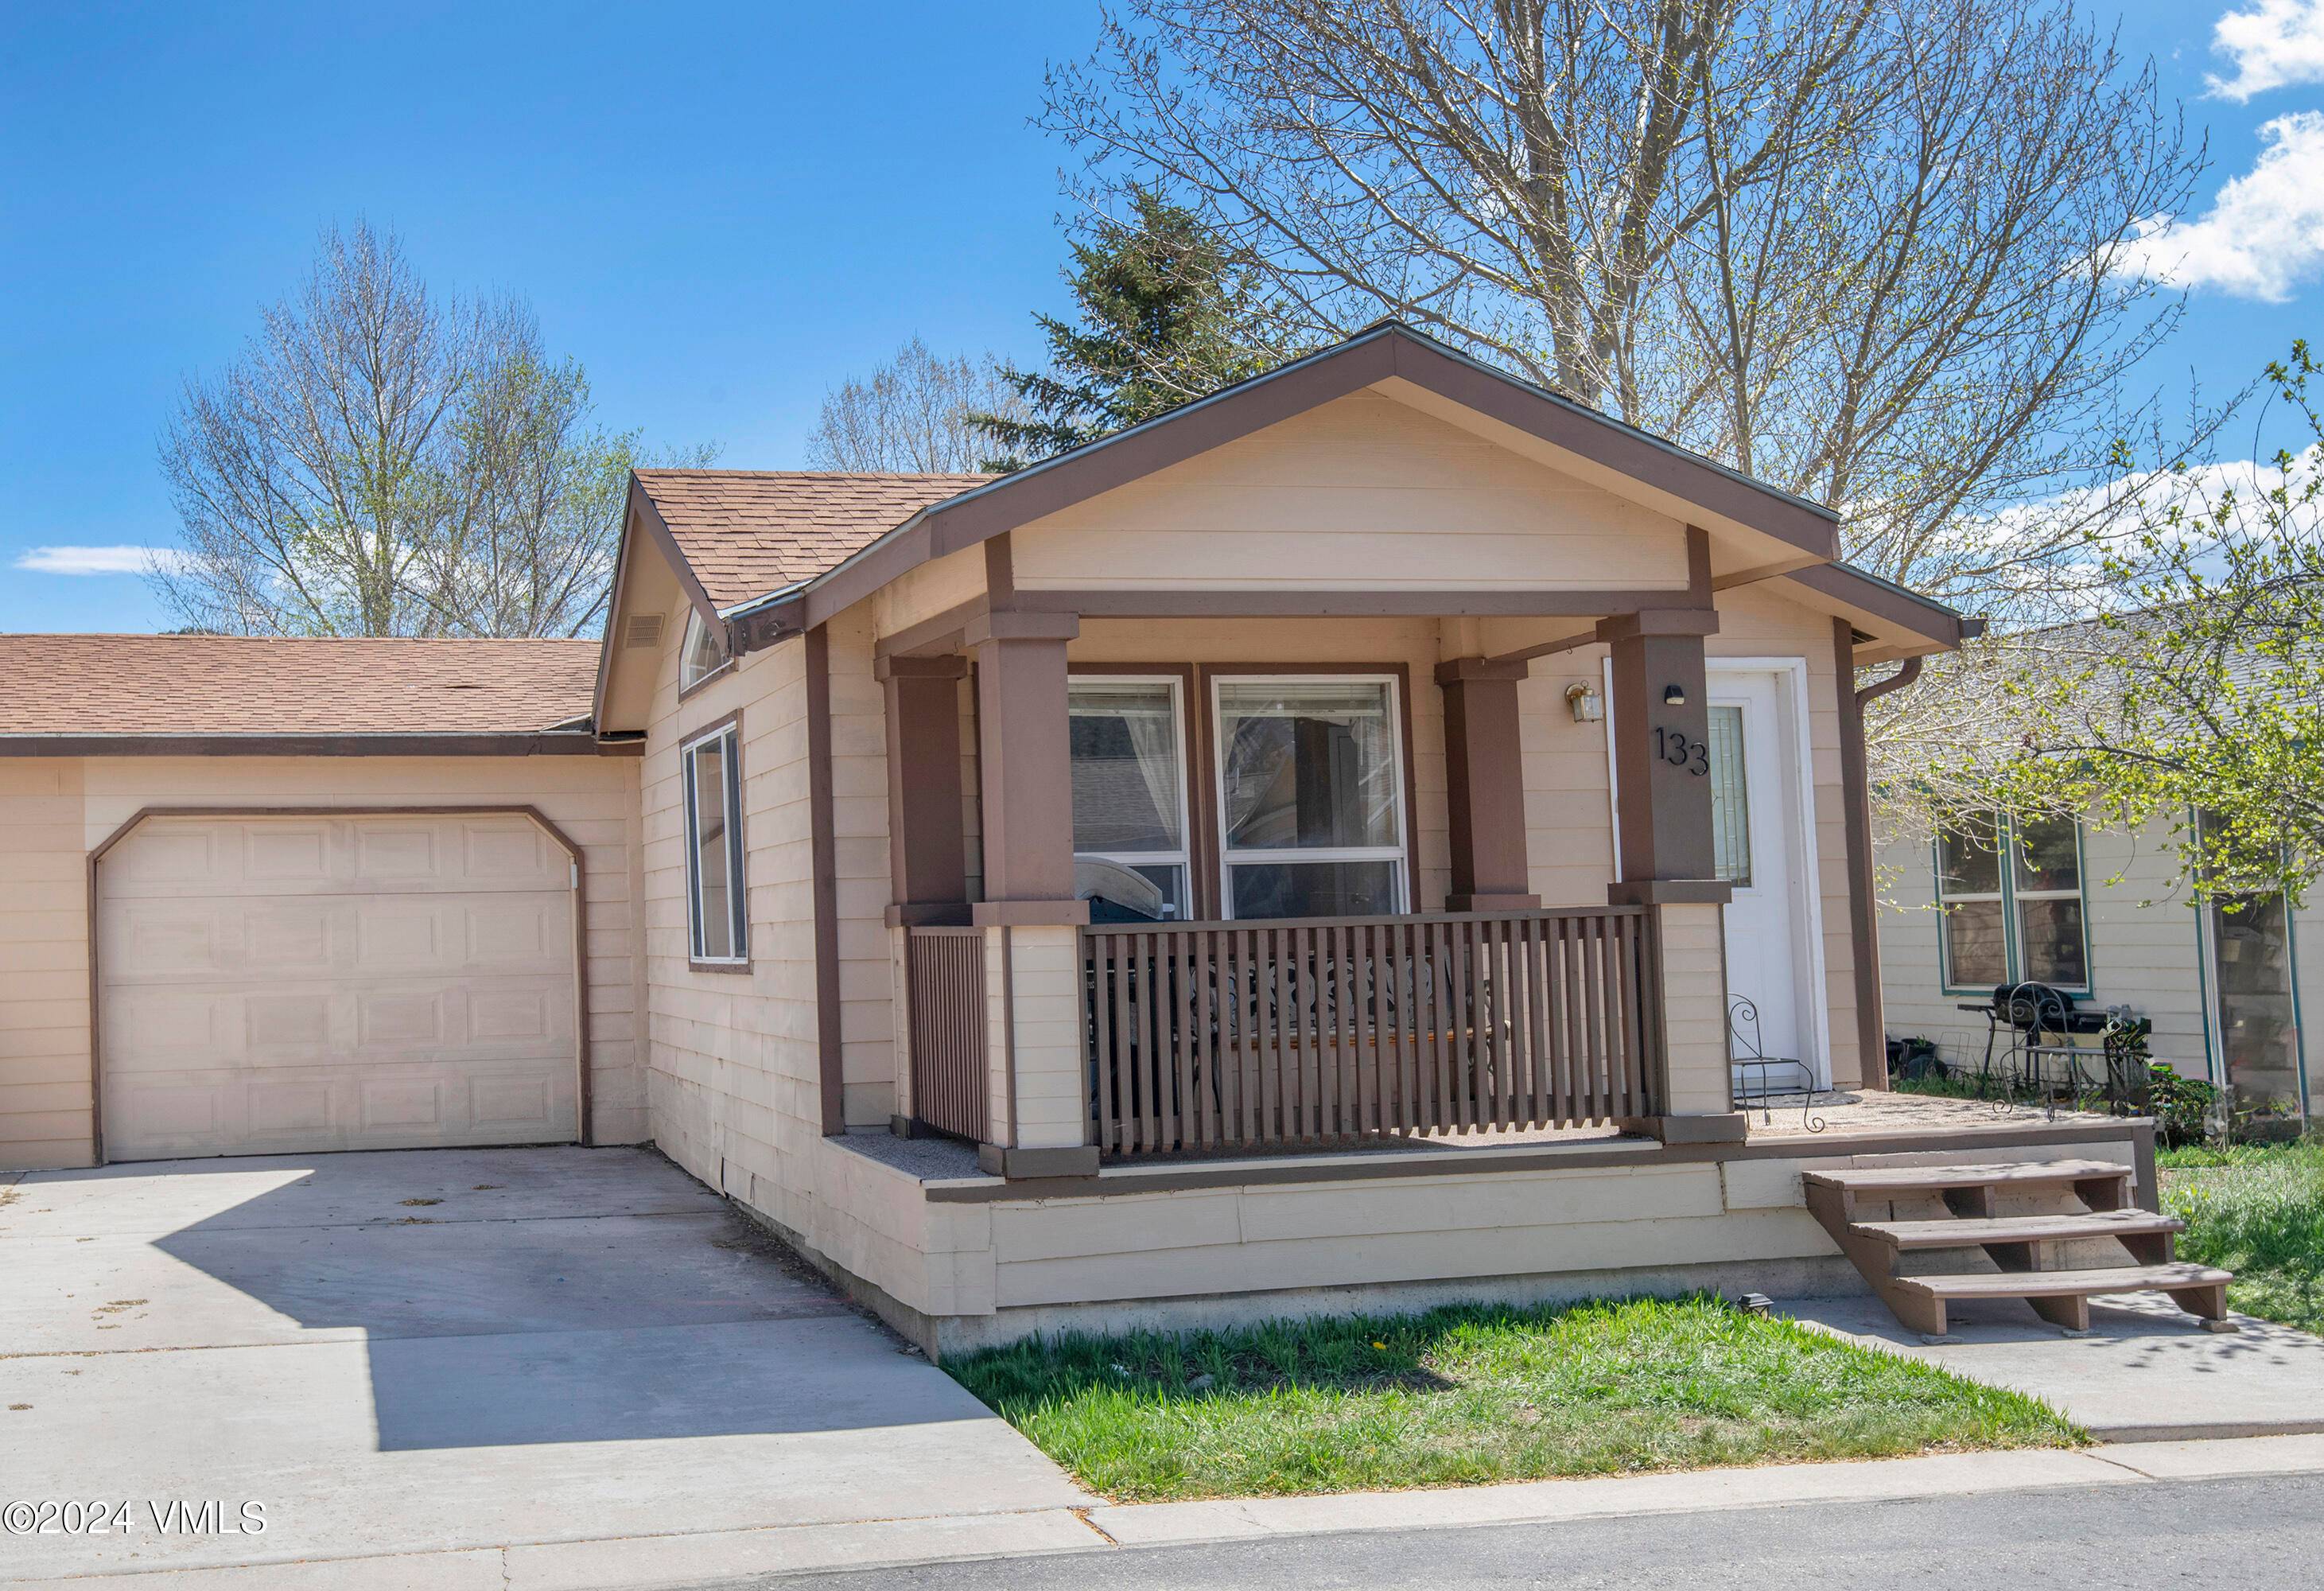 This charming home features three bedrooms and two bathrooms, complete with an attached garage, centrally located in desirable Two Rivers Village.